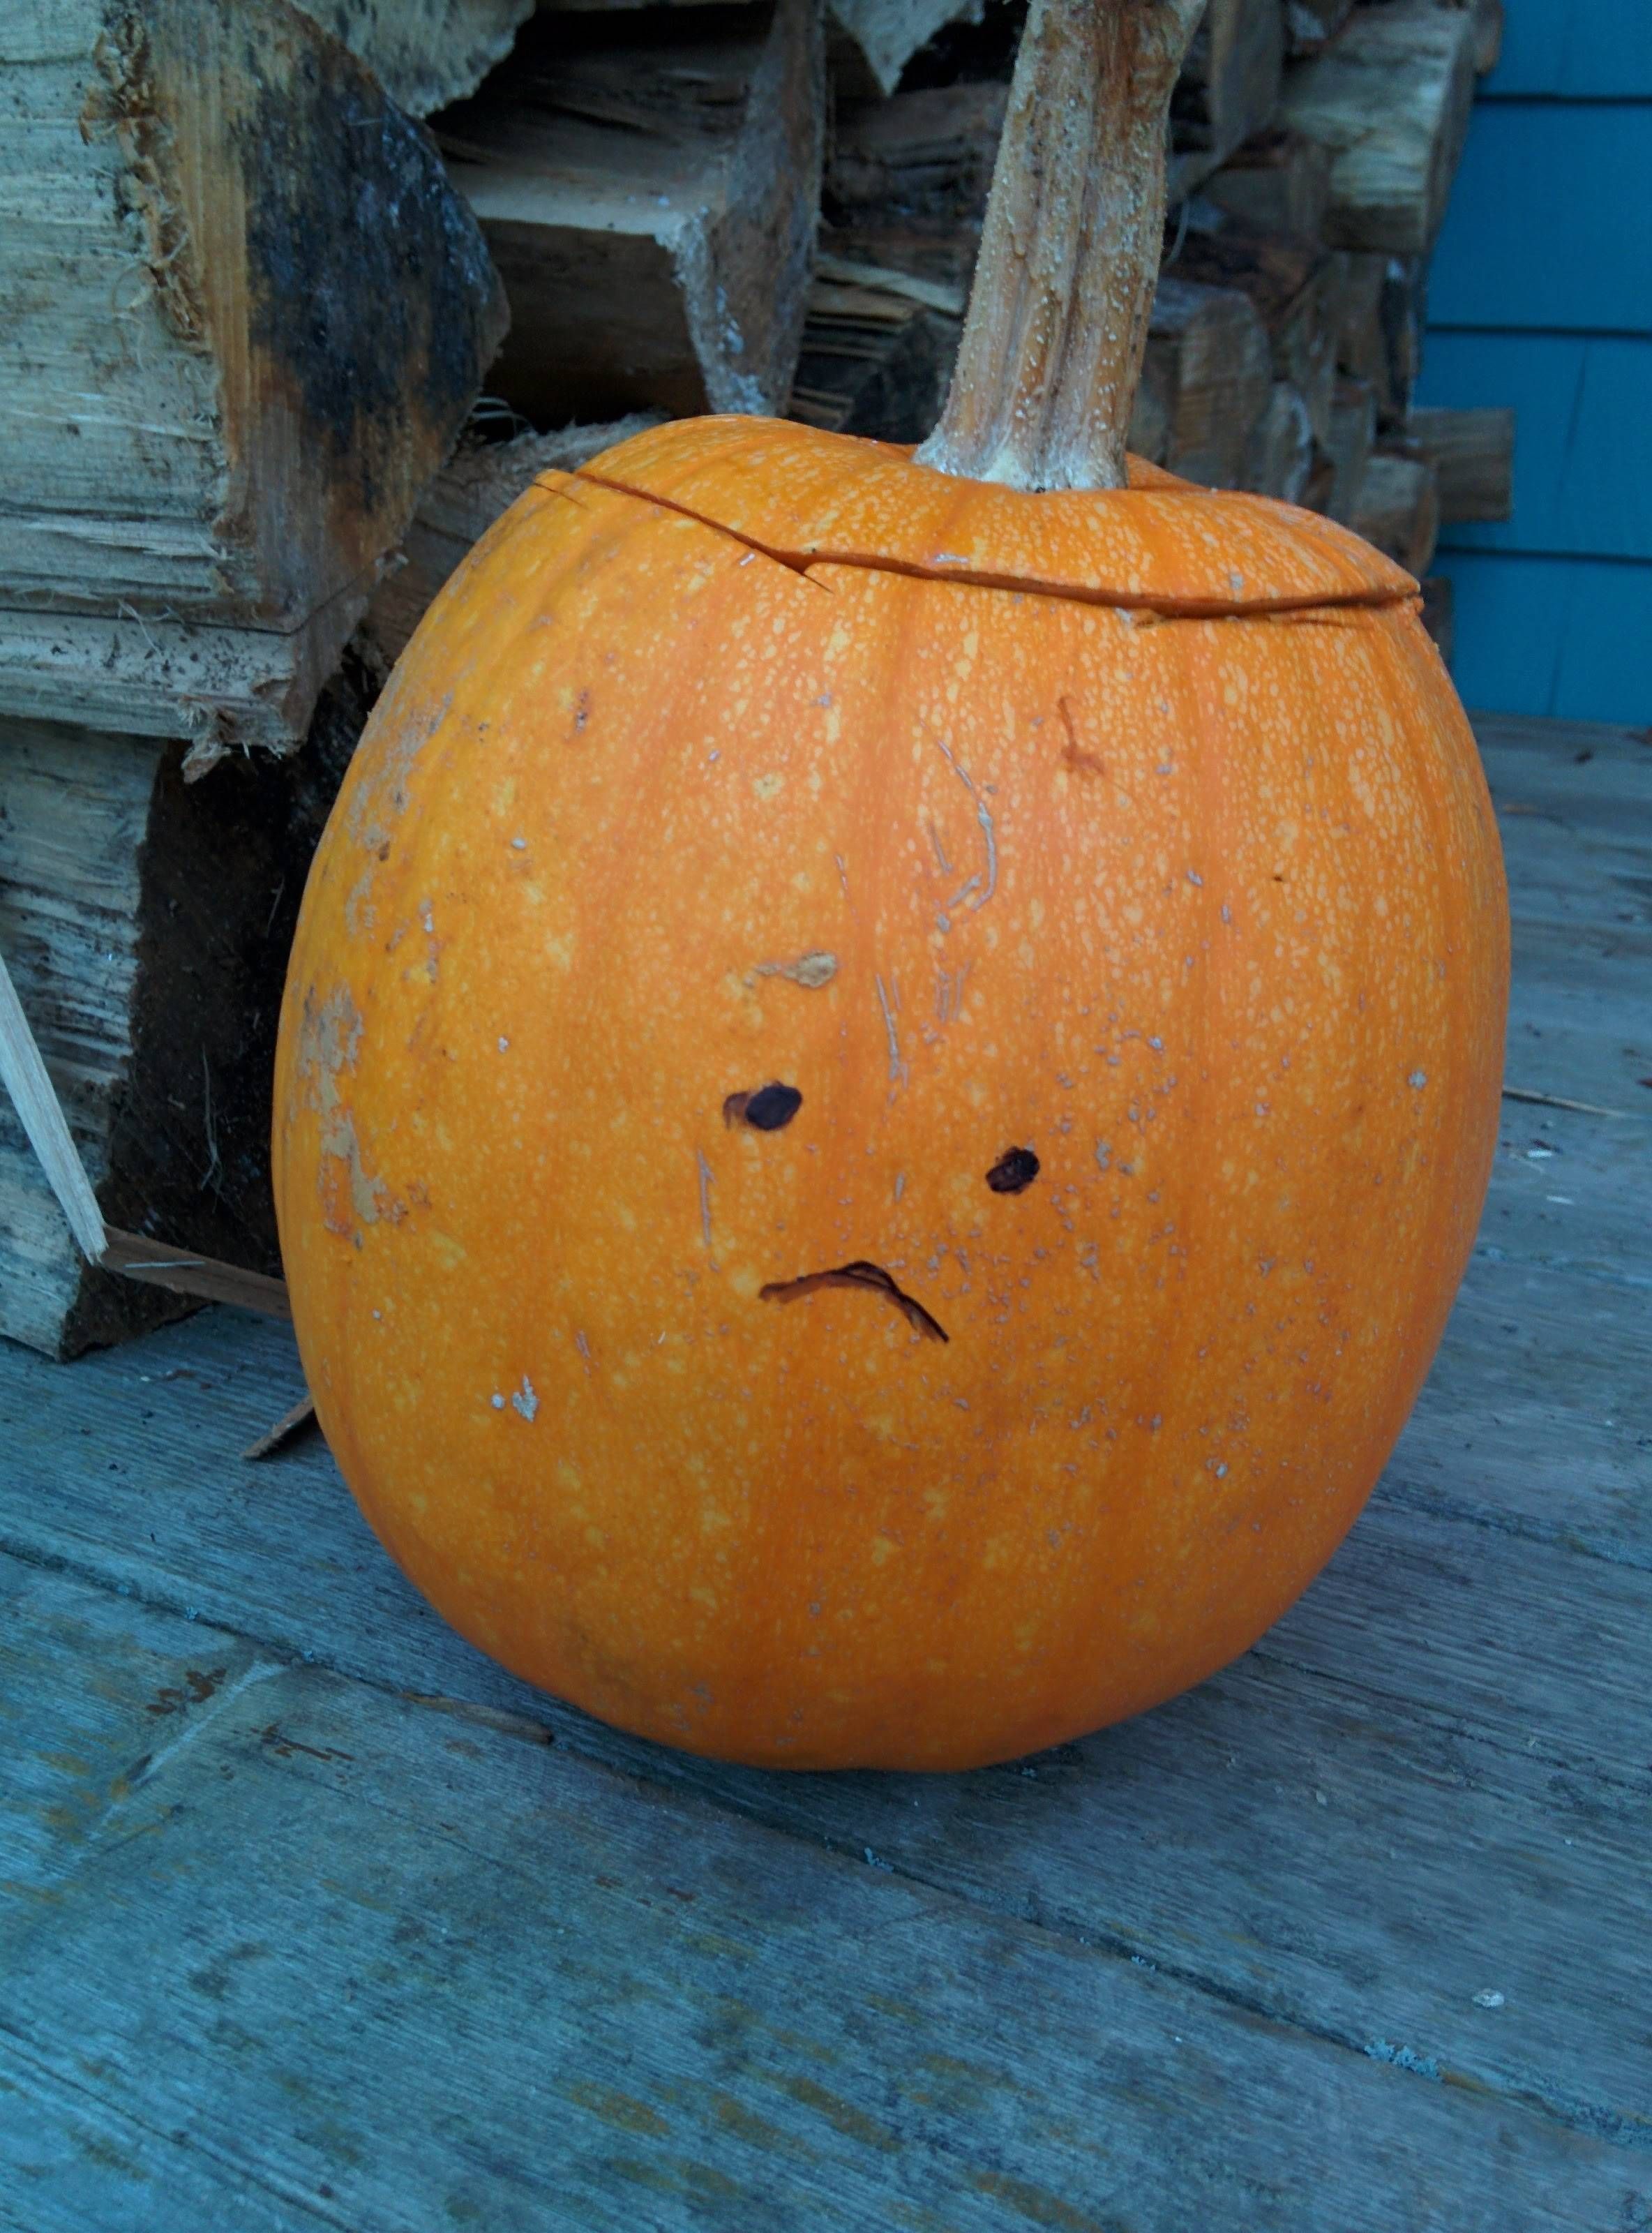 13 Year Old Goes All-Out Carving the Family Jack-o'-lantern